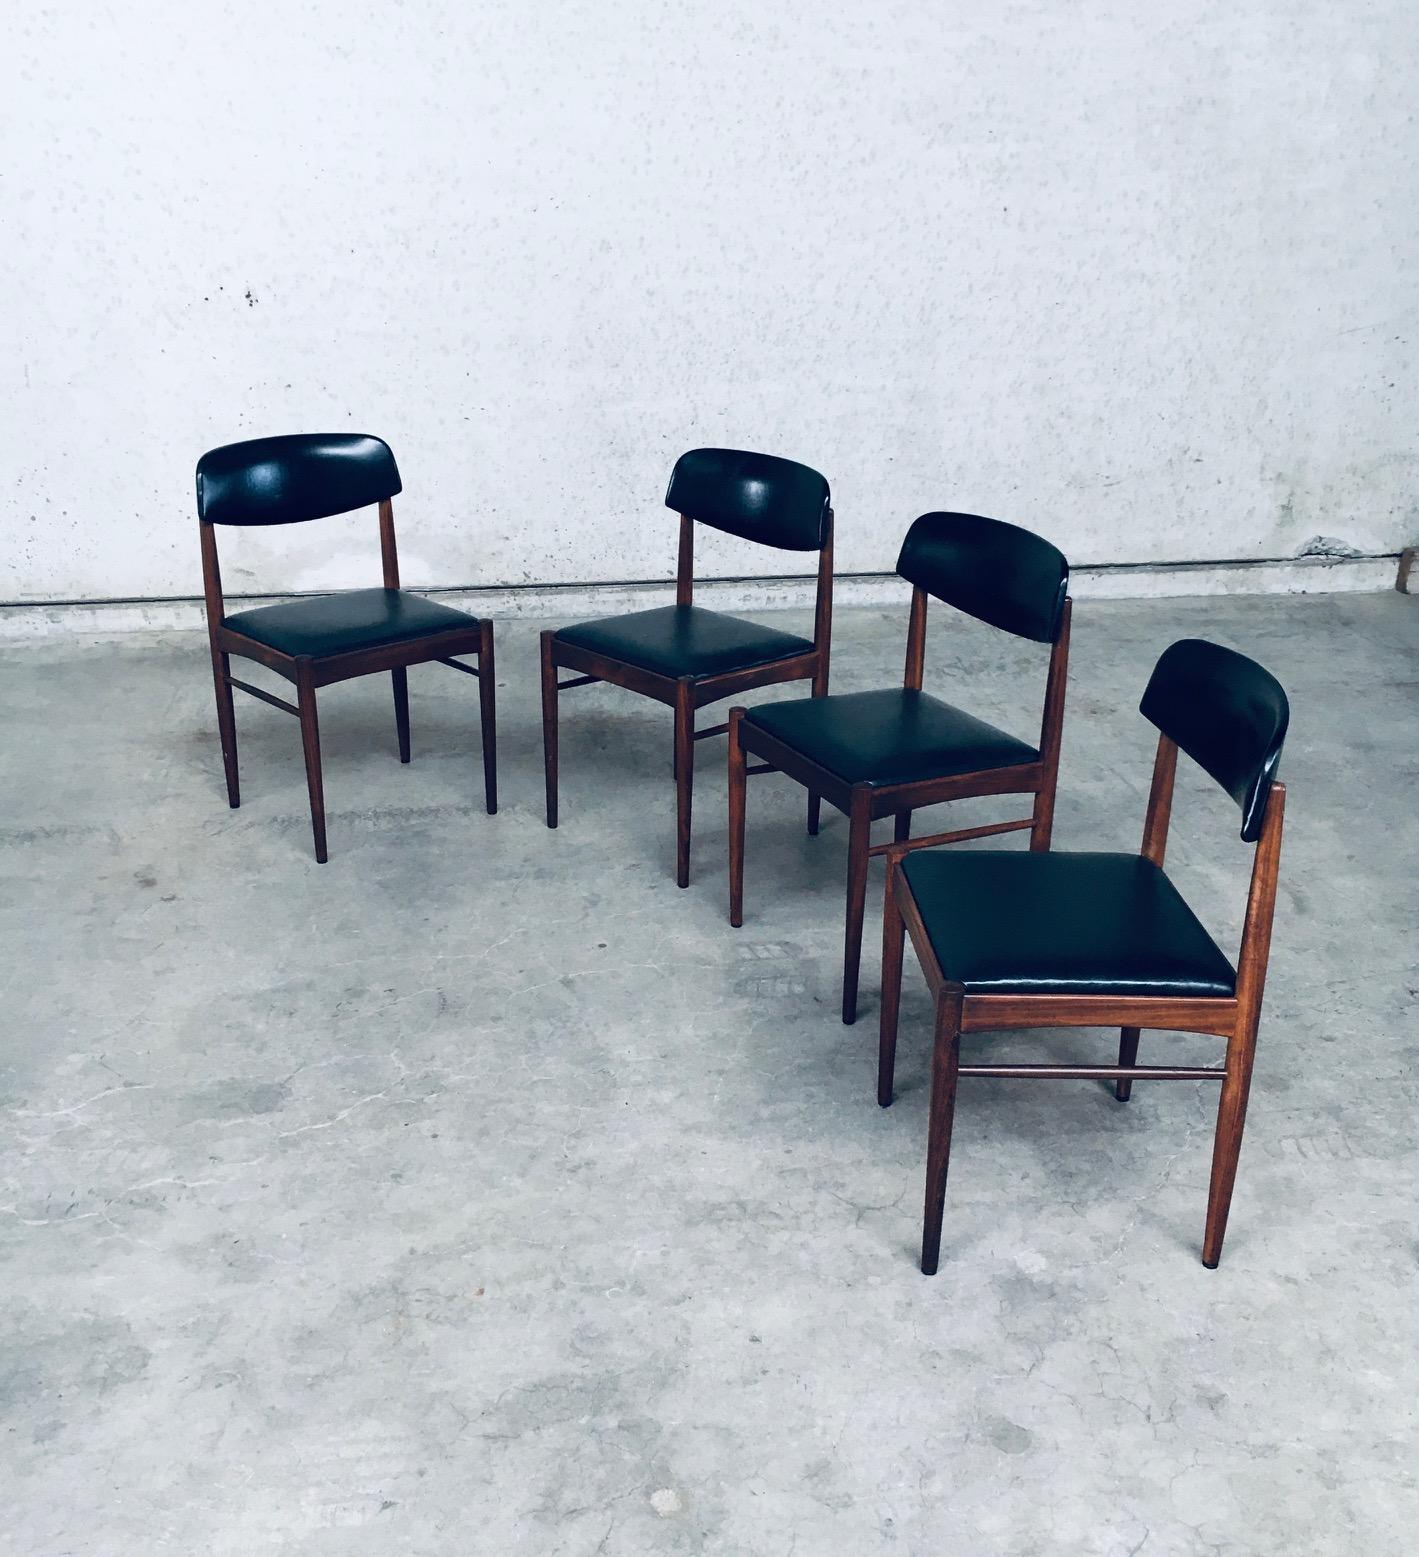 1960's Midcentury Dutch Design Dining Chairs In Good Condition For Sale In Oud-Turnhout, VAN